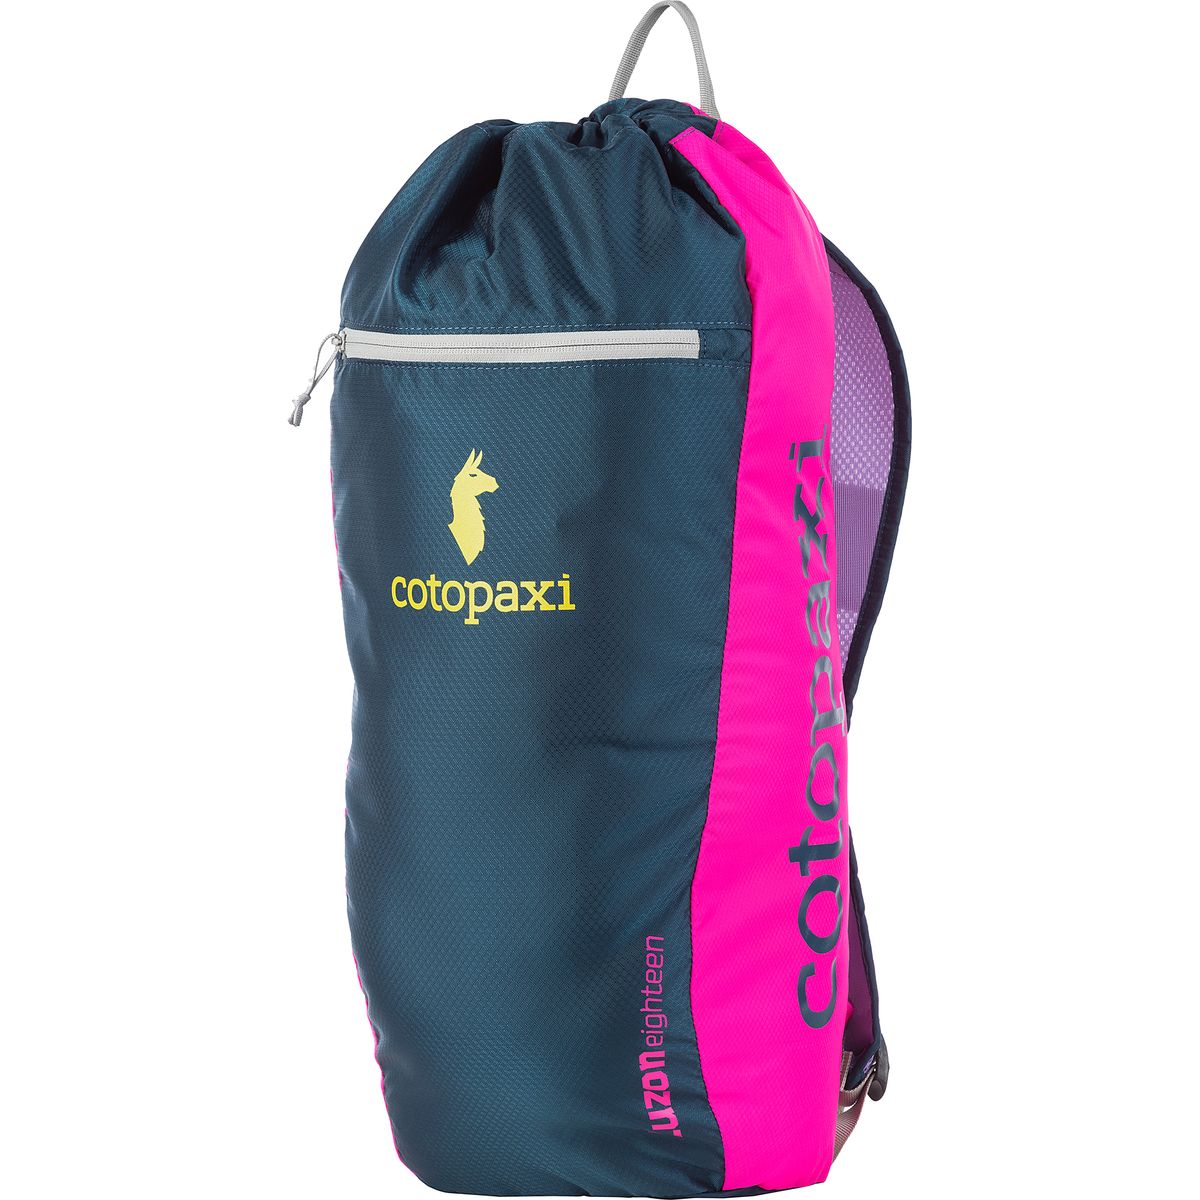 Cotopaxi Luzon Backpack - 1098cu in | eBay